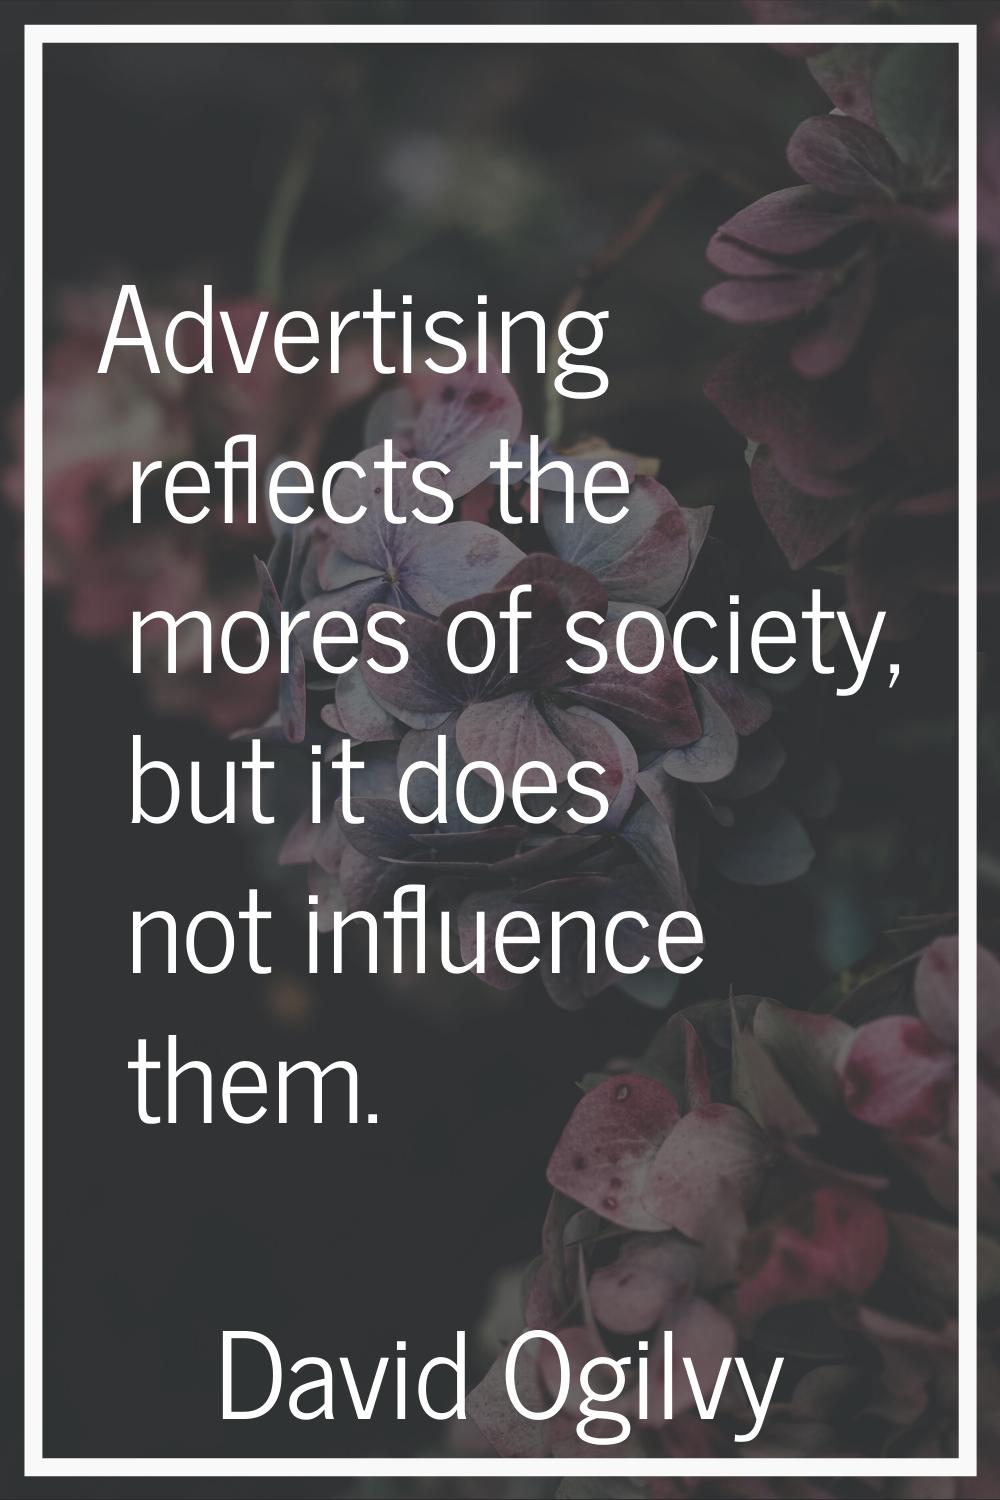 Advertising reflects the mores of society, but it does not influence them.